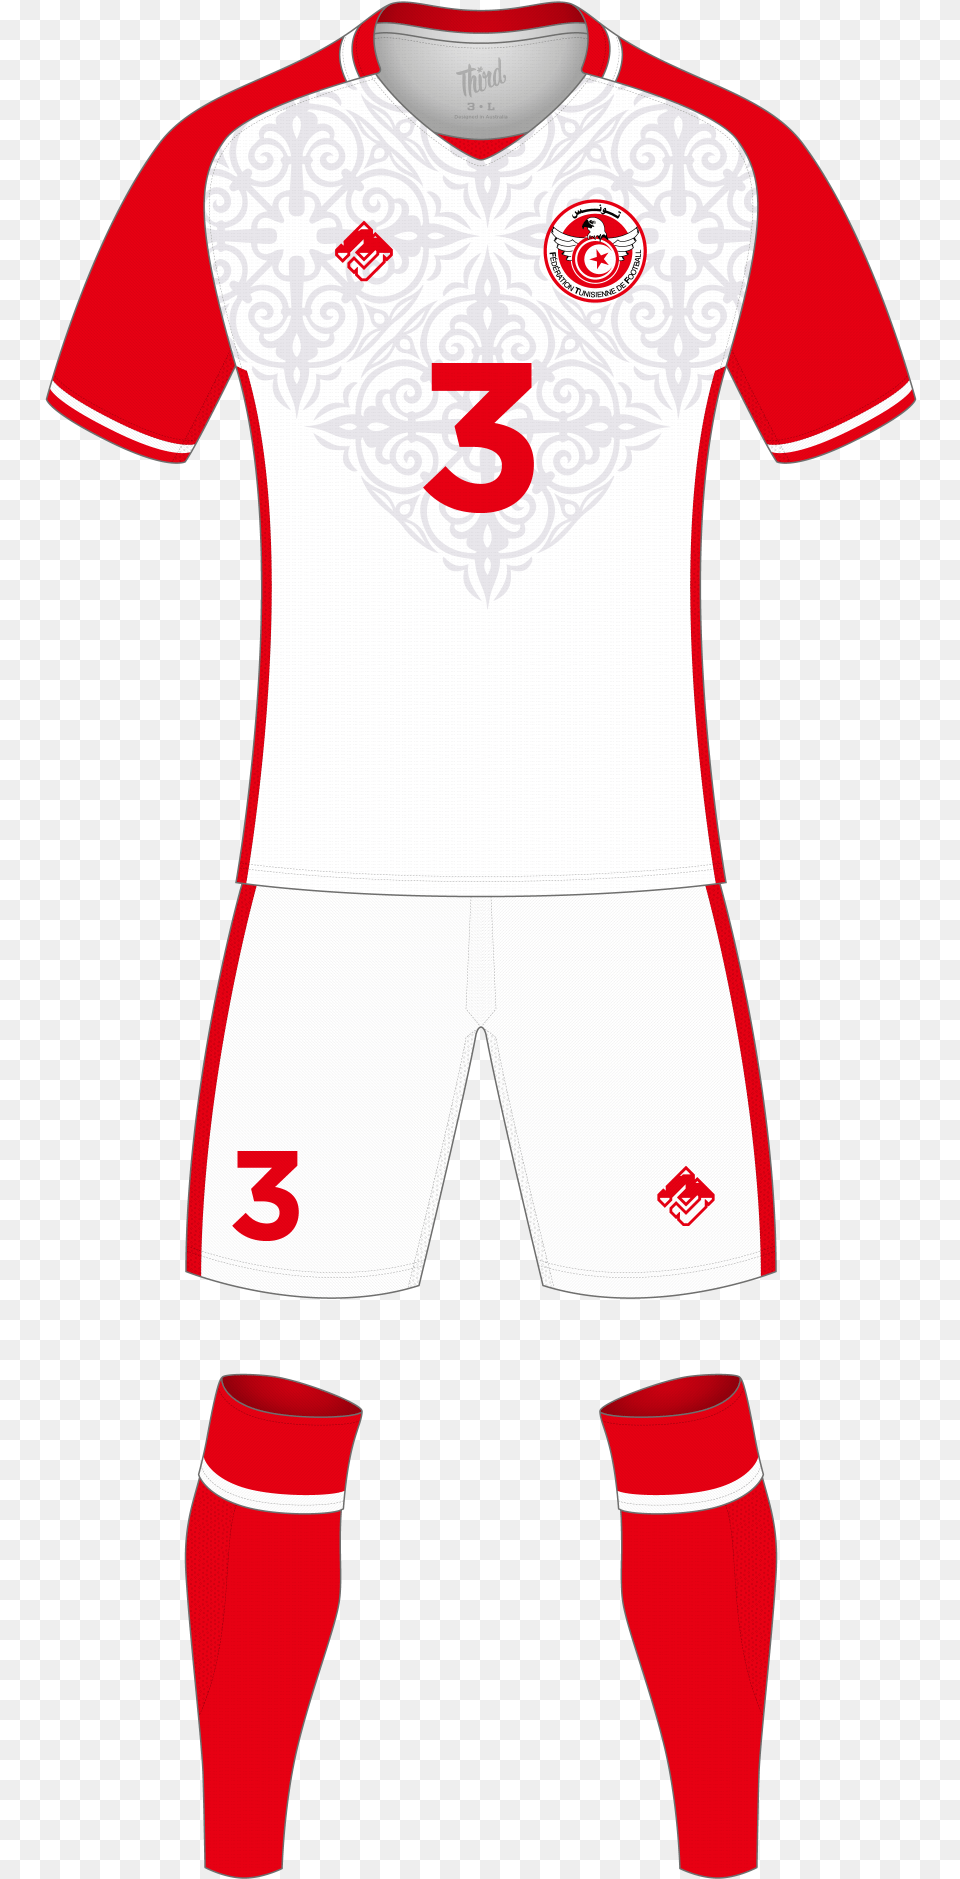 Tunisia World Cup 2018 Concept National Football Team Clothes, Clothing, Shirt, Person, Jersey Png Image